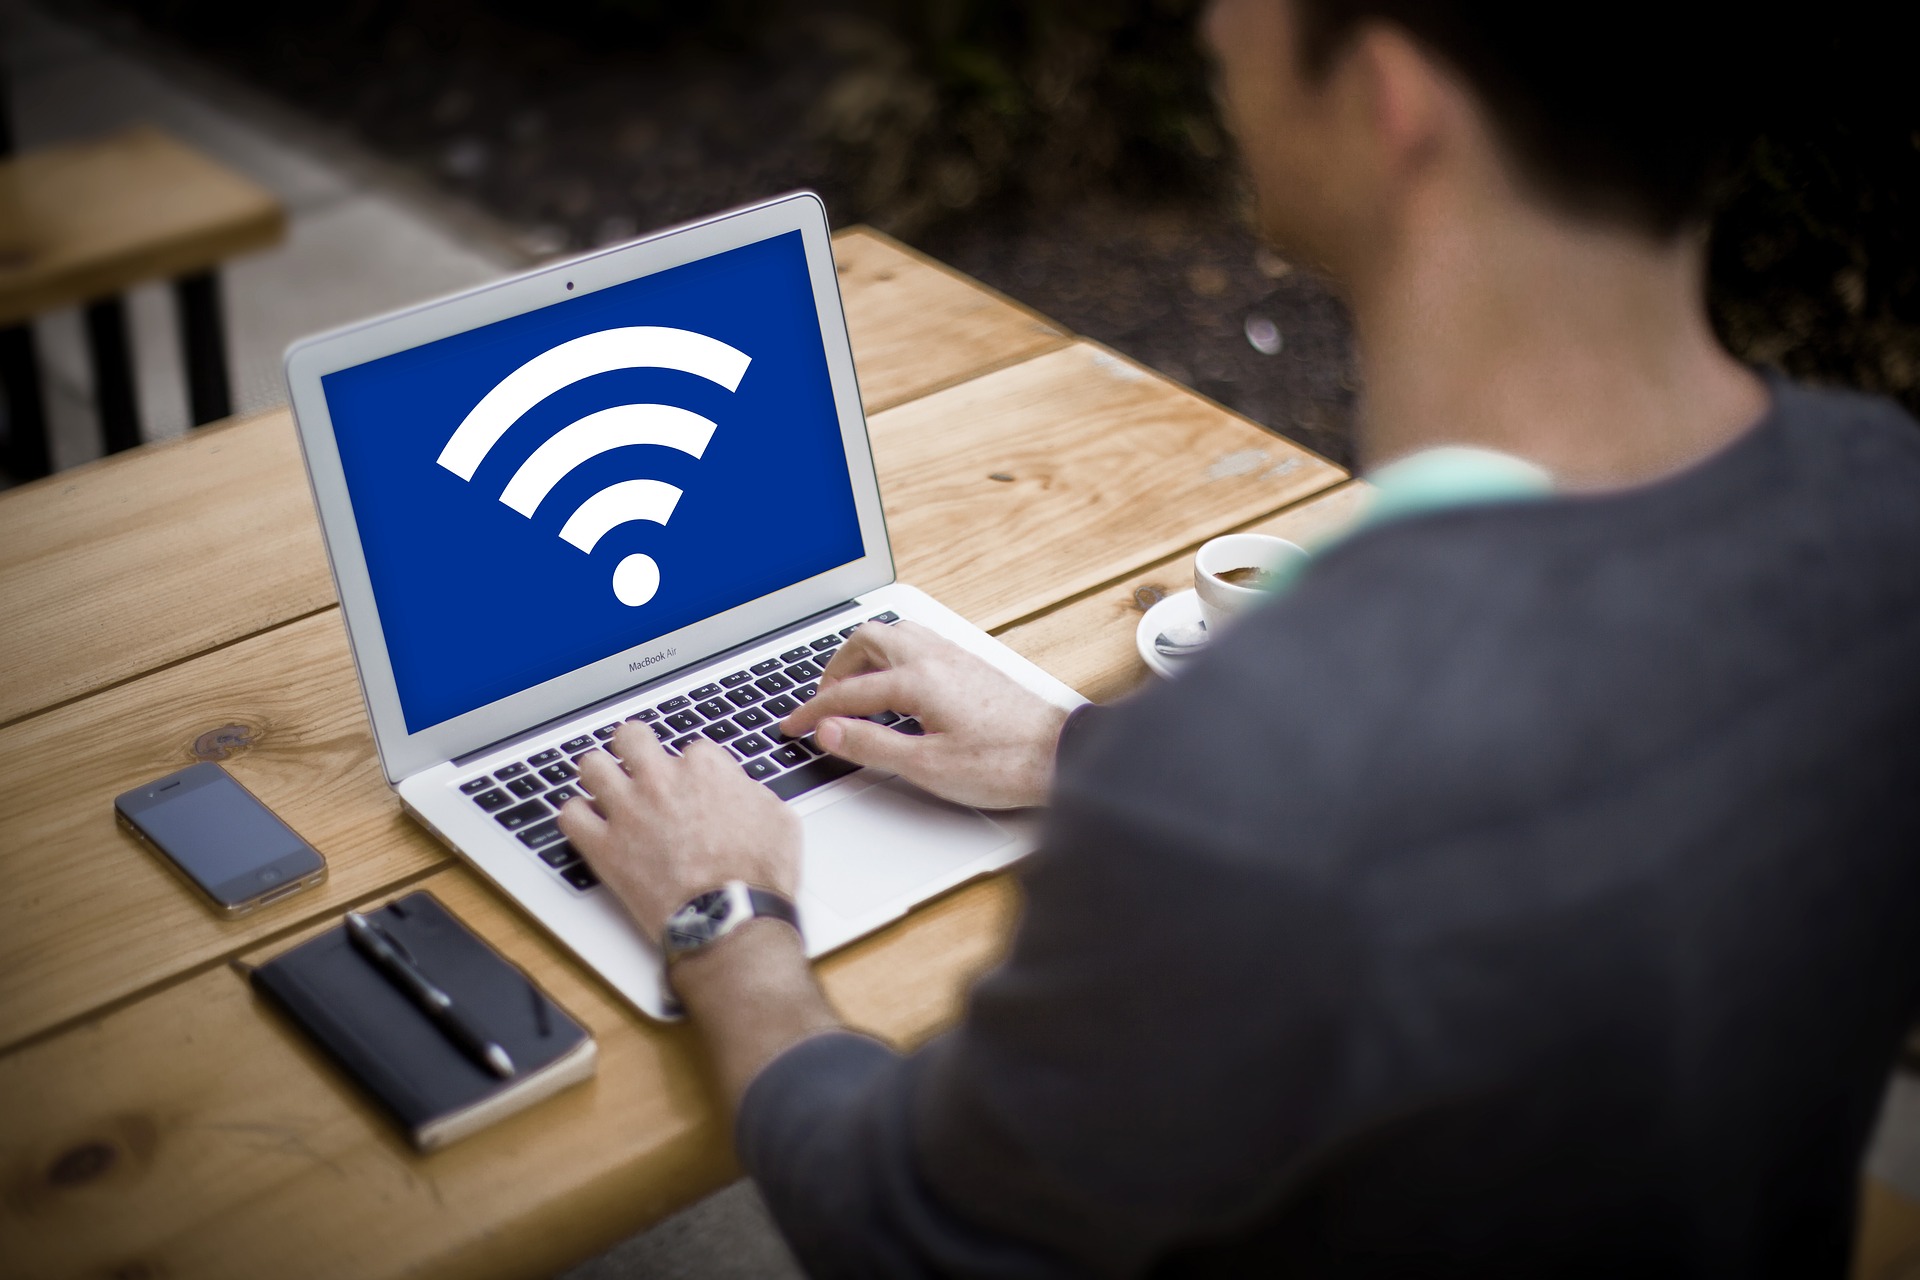 Man on laptop with screen showing large "wifi" symbol.